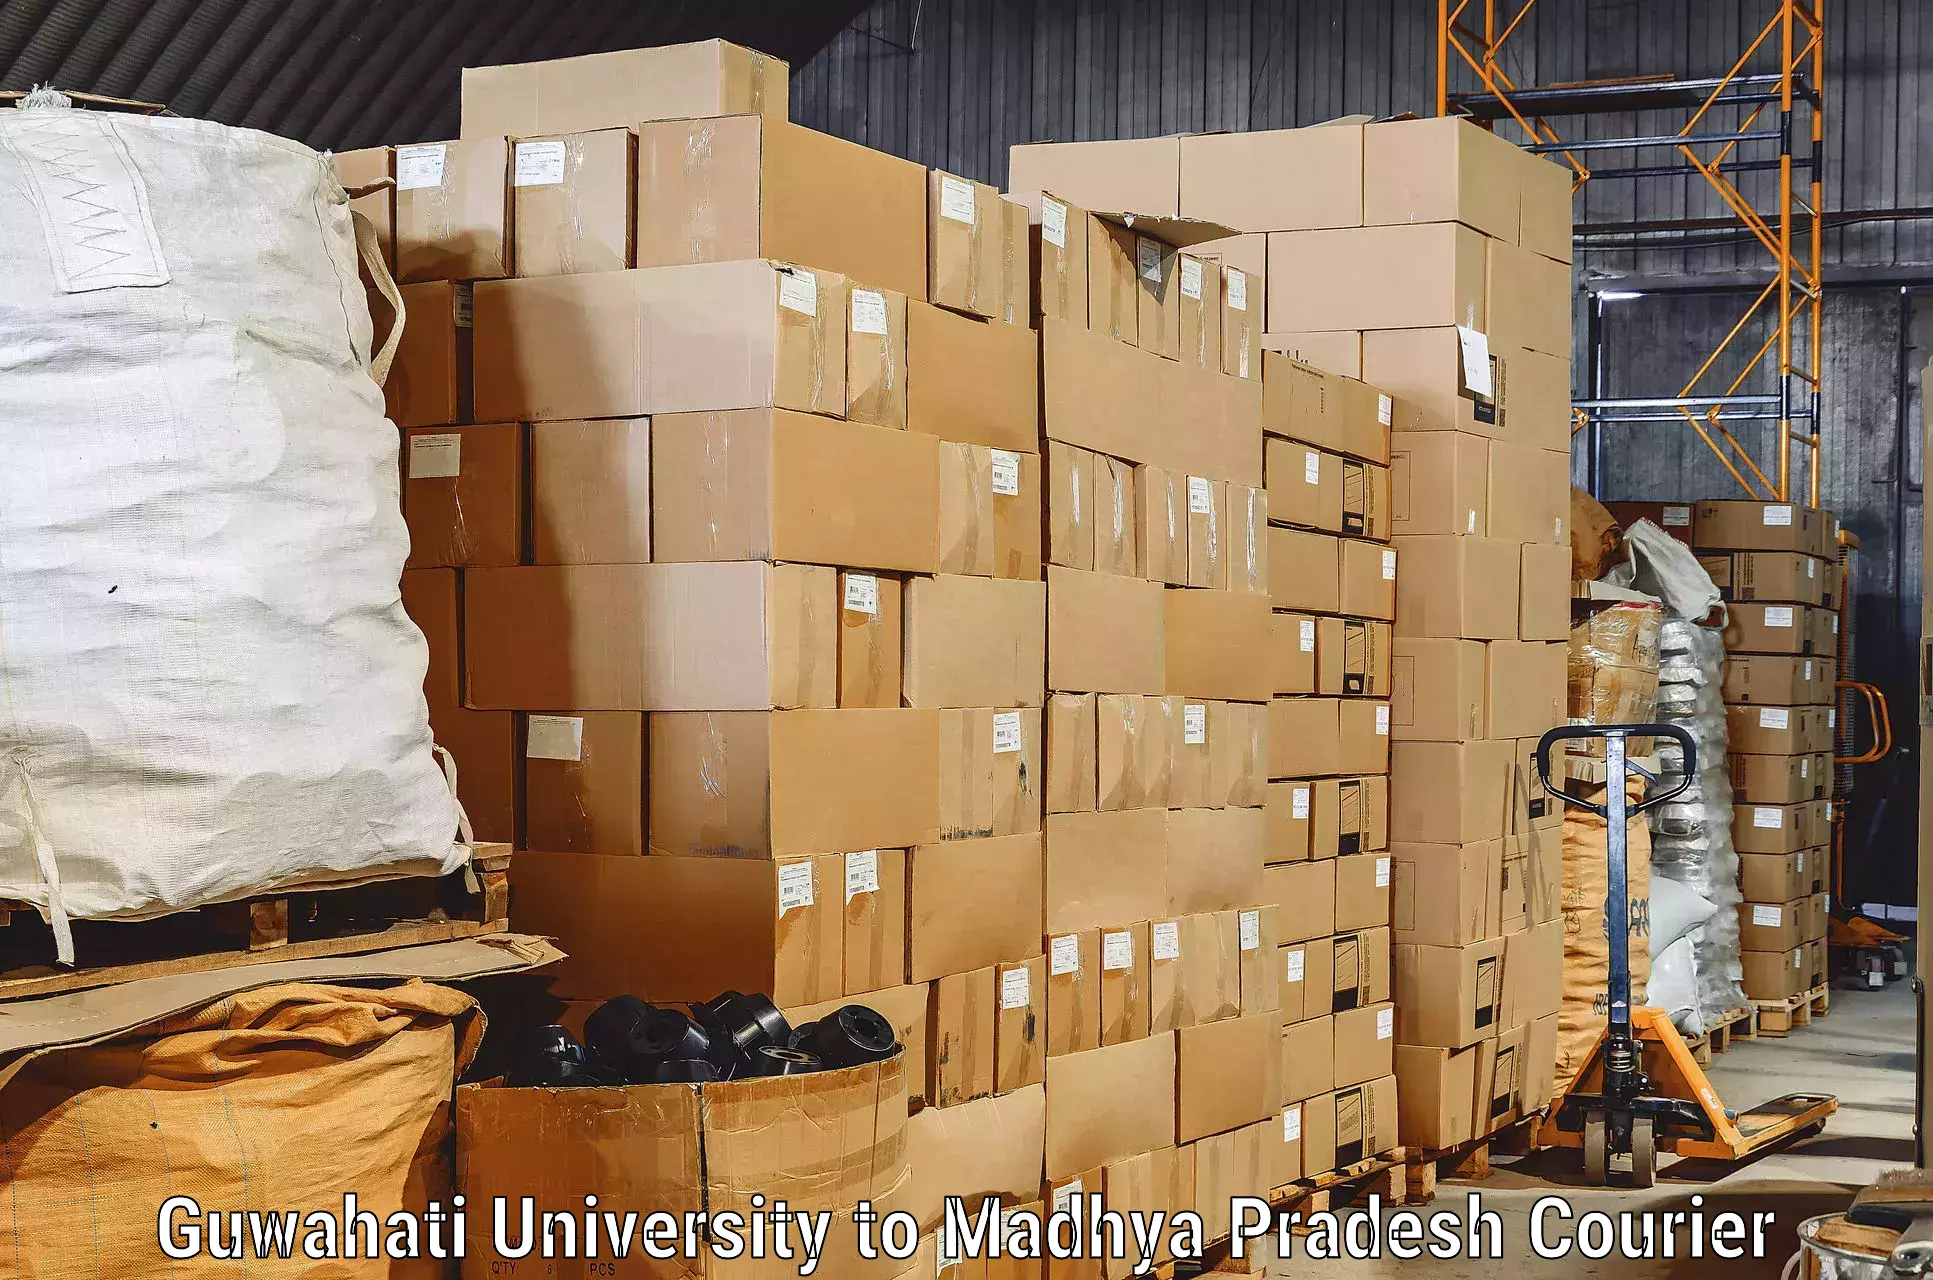 Comprehensive moving assistance Guwahati University to Indore